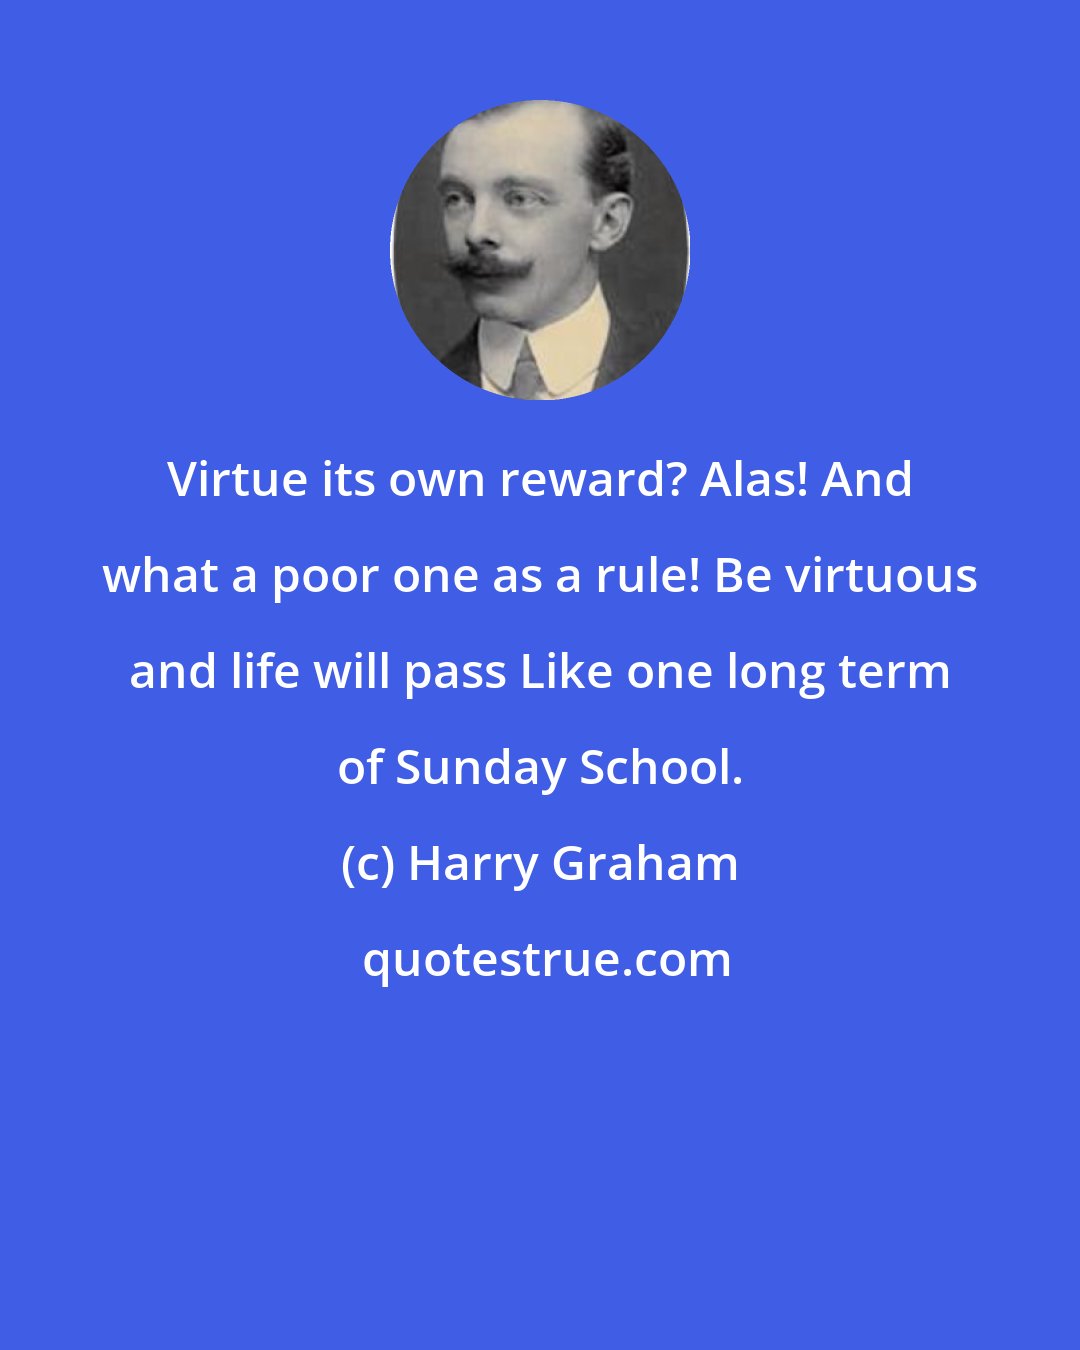 Harry Graham: Virtue its own reward? Alas! And what a poor one as a rule! Be virtuous and life will pass Like one long term of Sunday School.